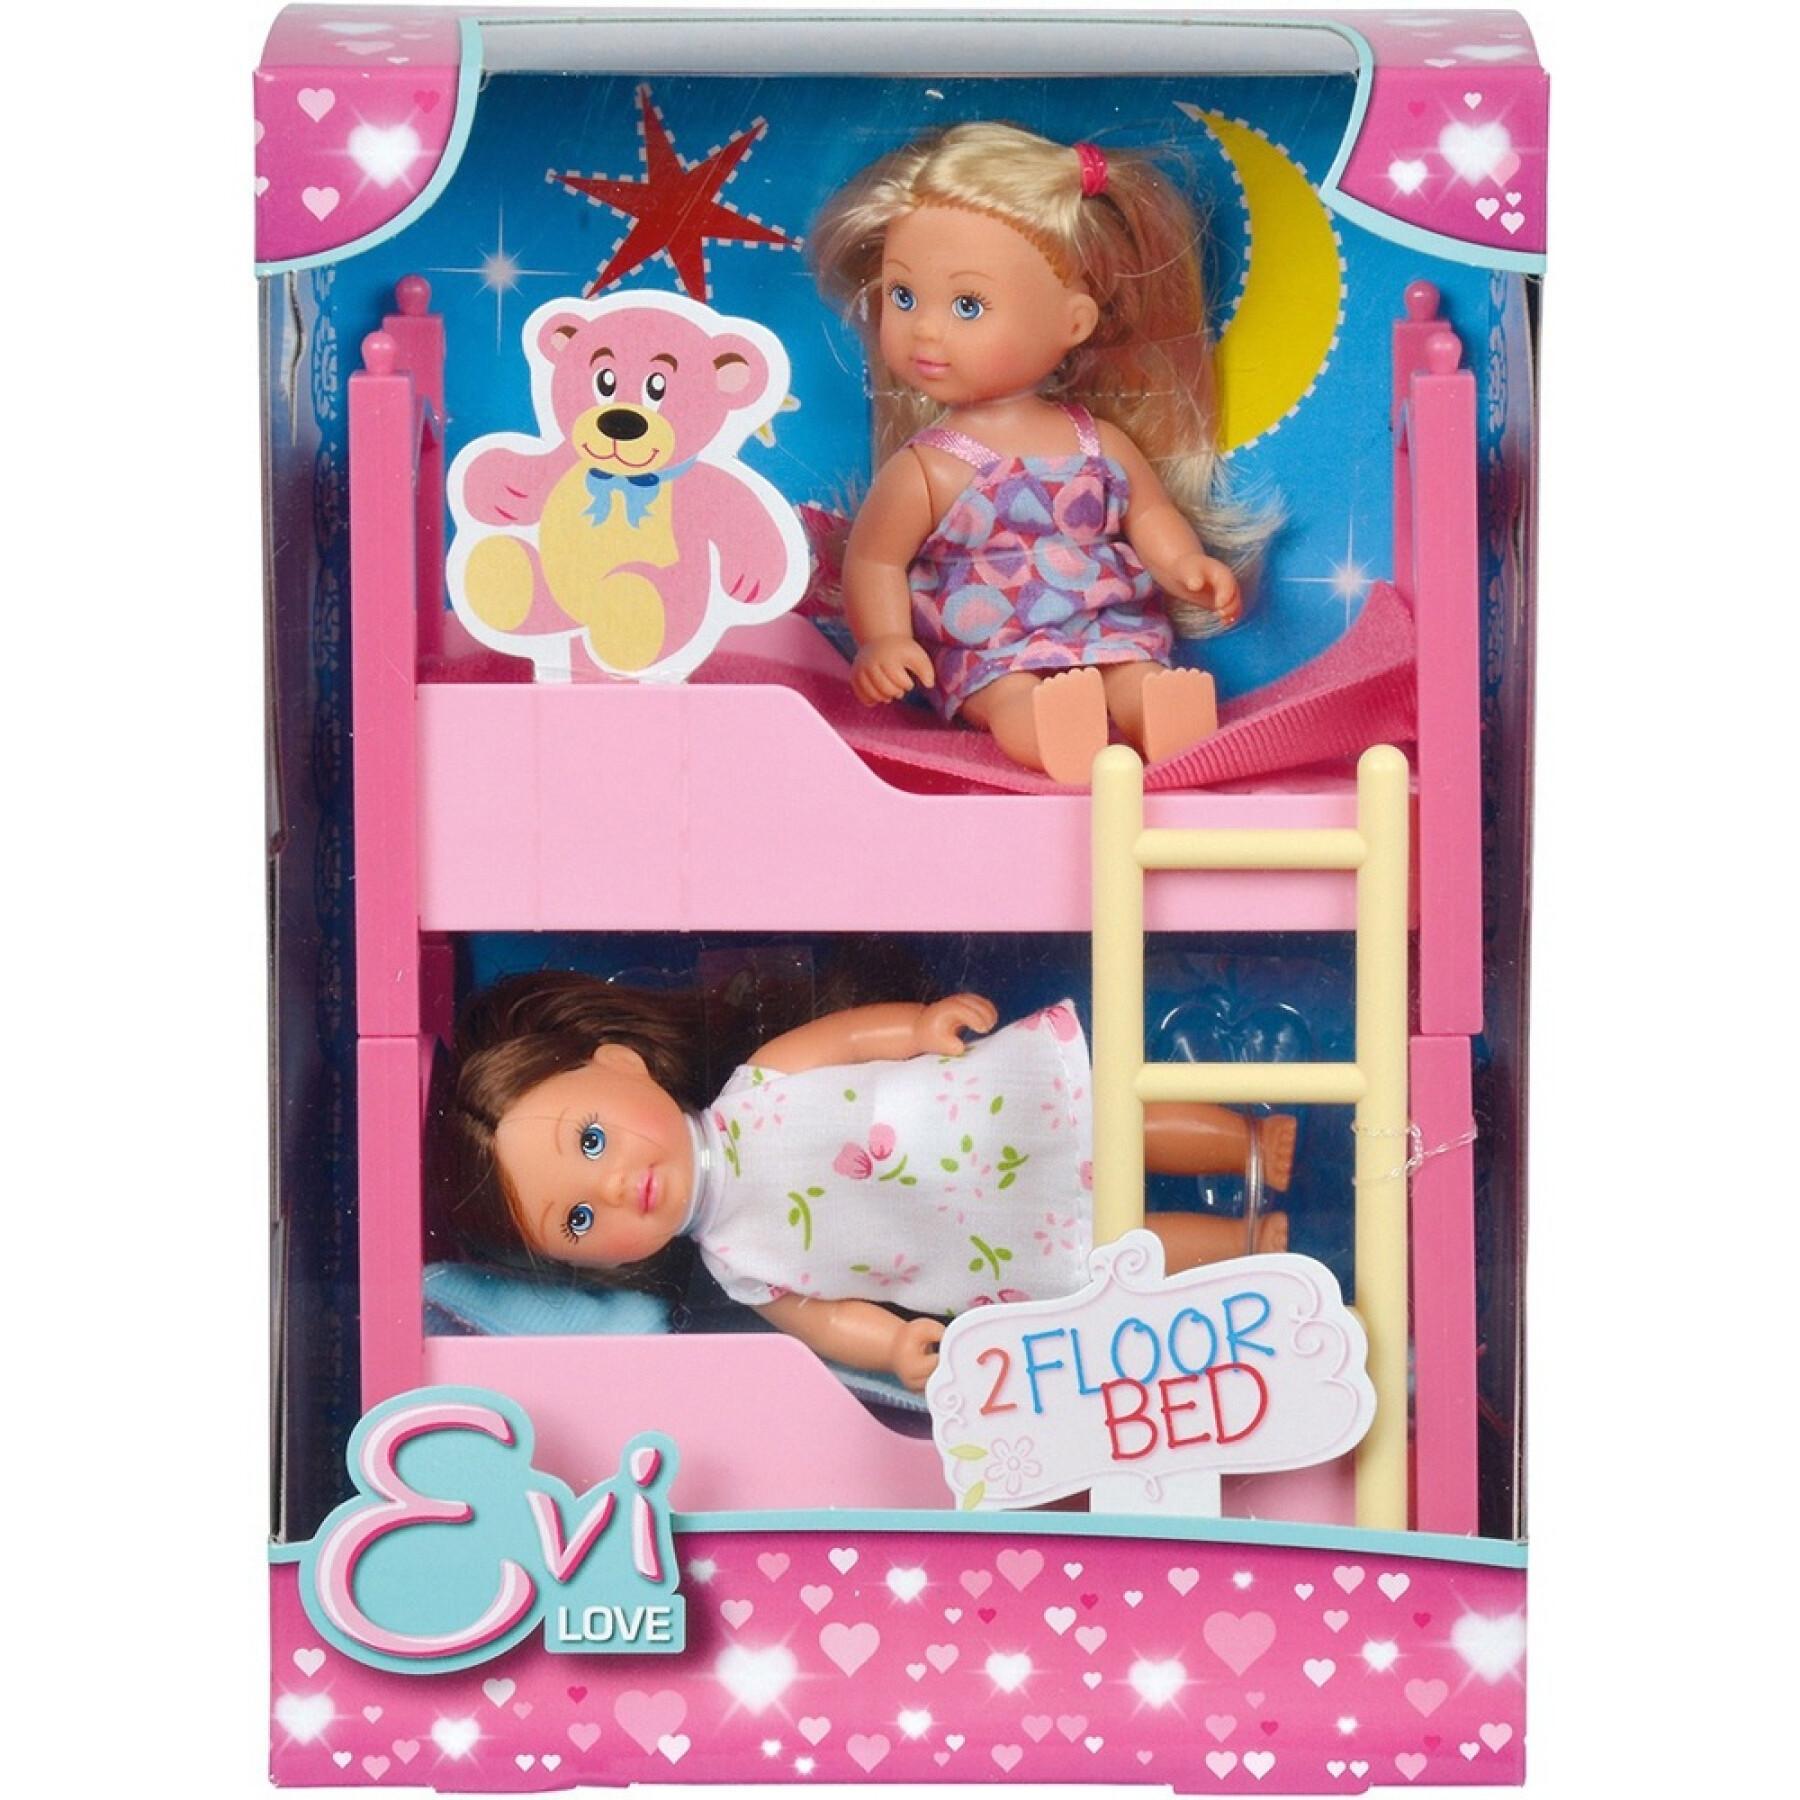 Evi love bunk beds Smoby